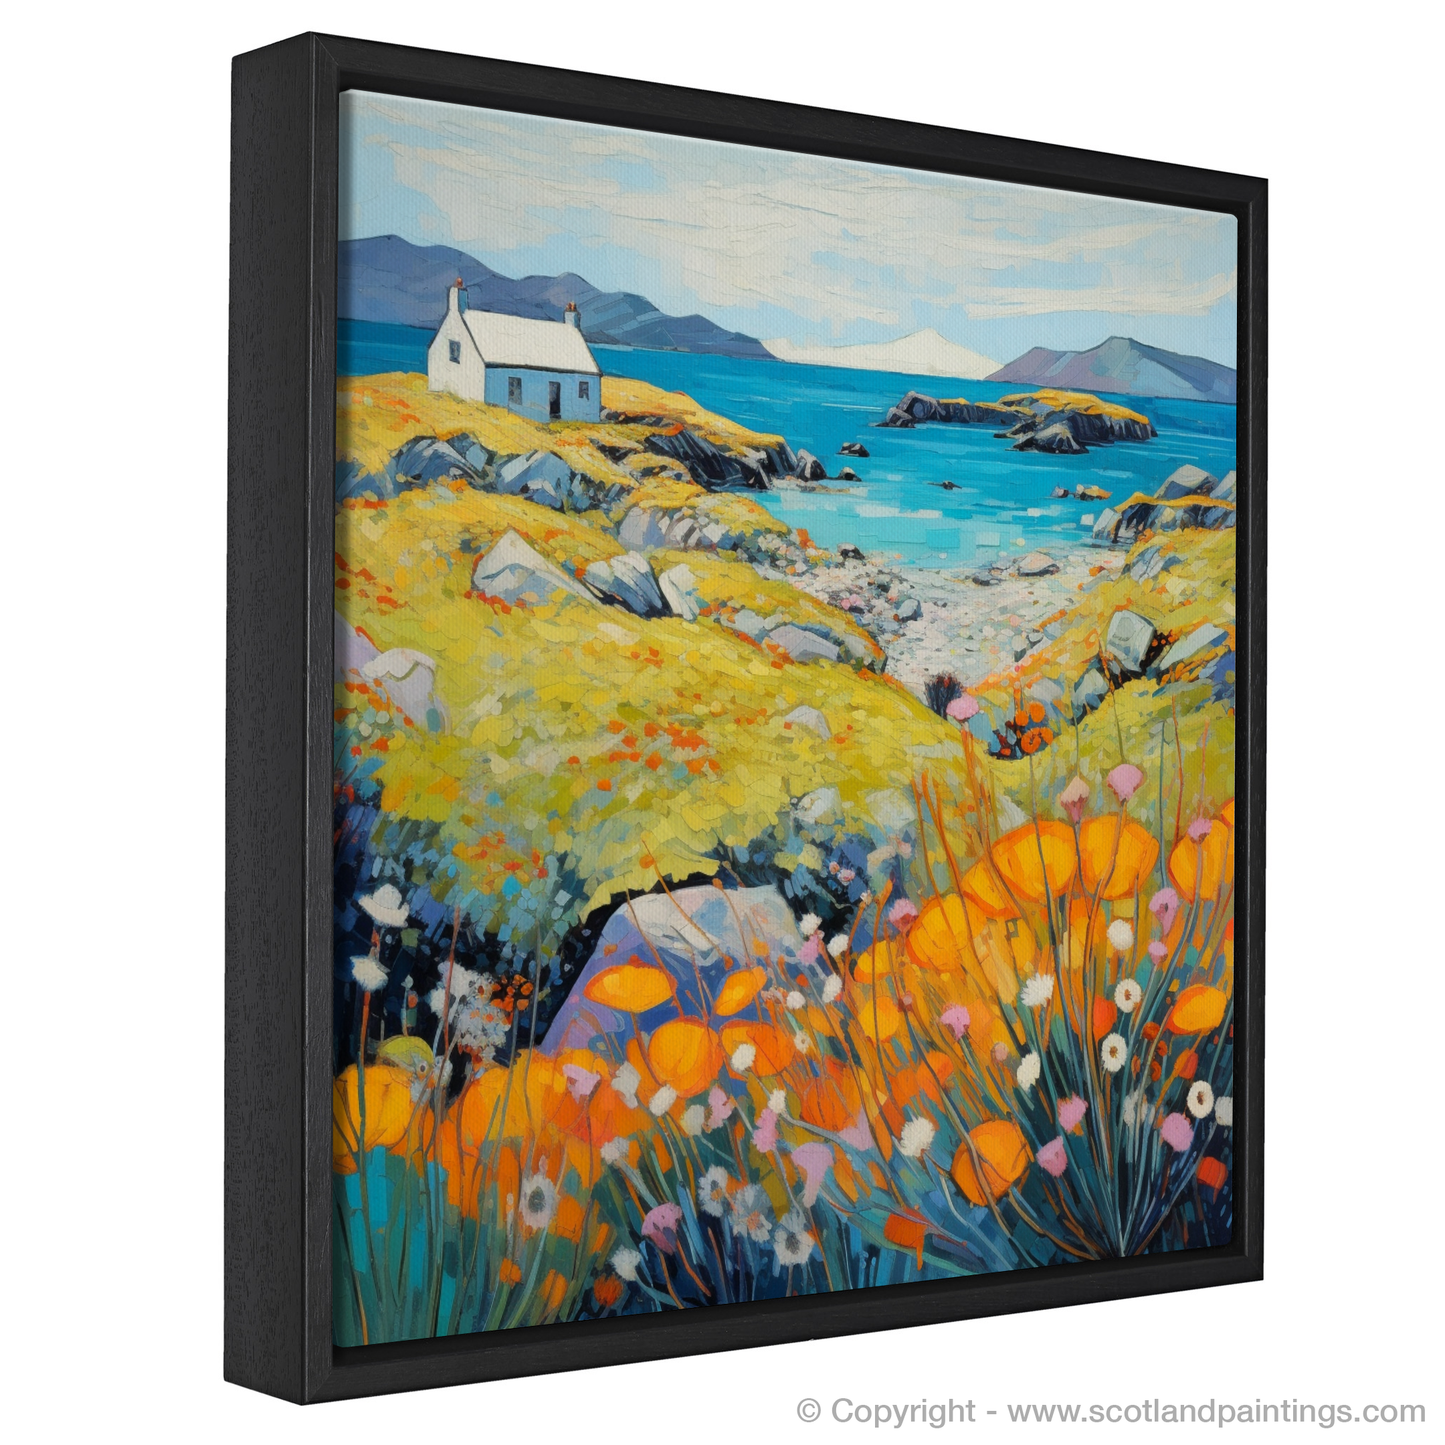 Painting and Art Print of Isle of Scalpay, Outer Hebrides in summer entitled "Summer Vibrance on Isle of Scalpay".